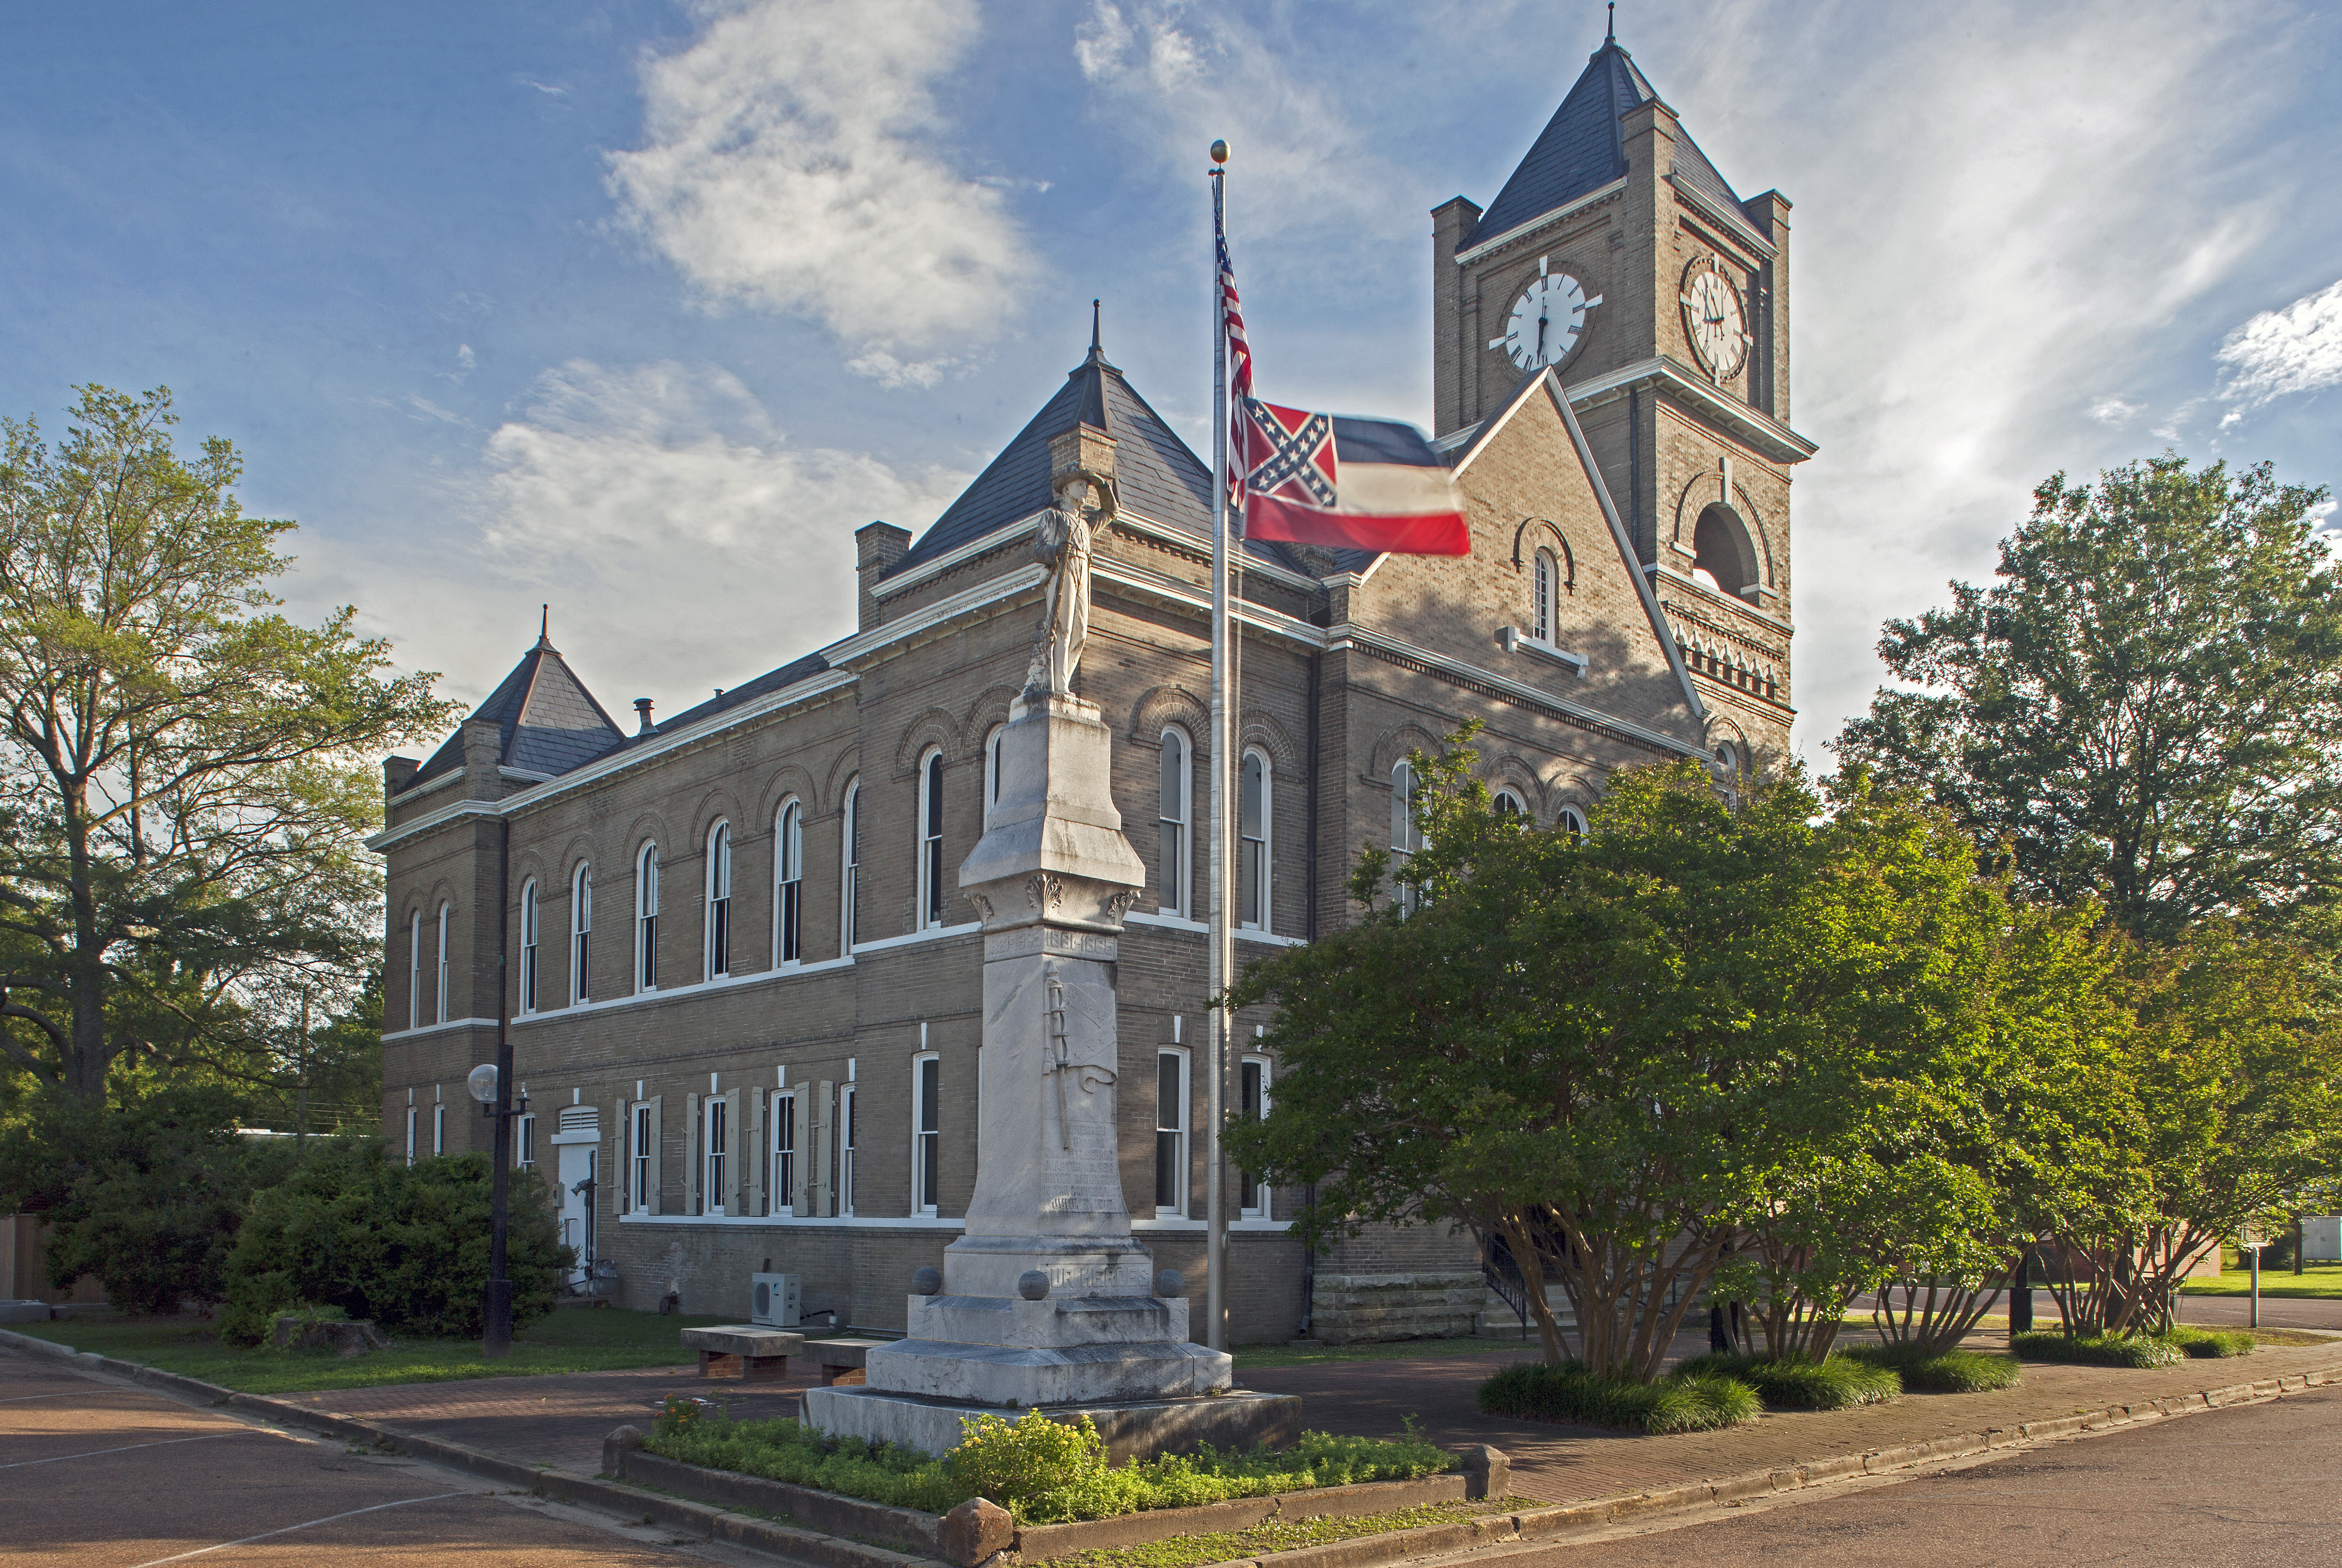 The courthouse in Sumner, Miss., where, in 1955, an all-white jury acquitted two white men in Till's murder. A debate rages in Mississippi over the state flag, which includes the Confederate flag. But it still flies at the courthouse. Langdon Clay